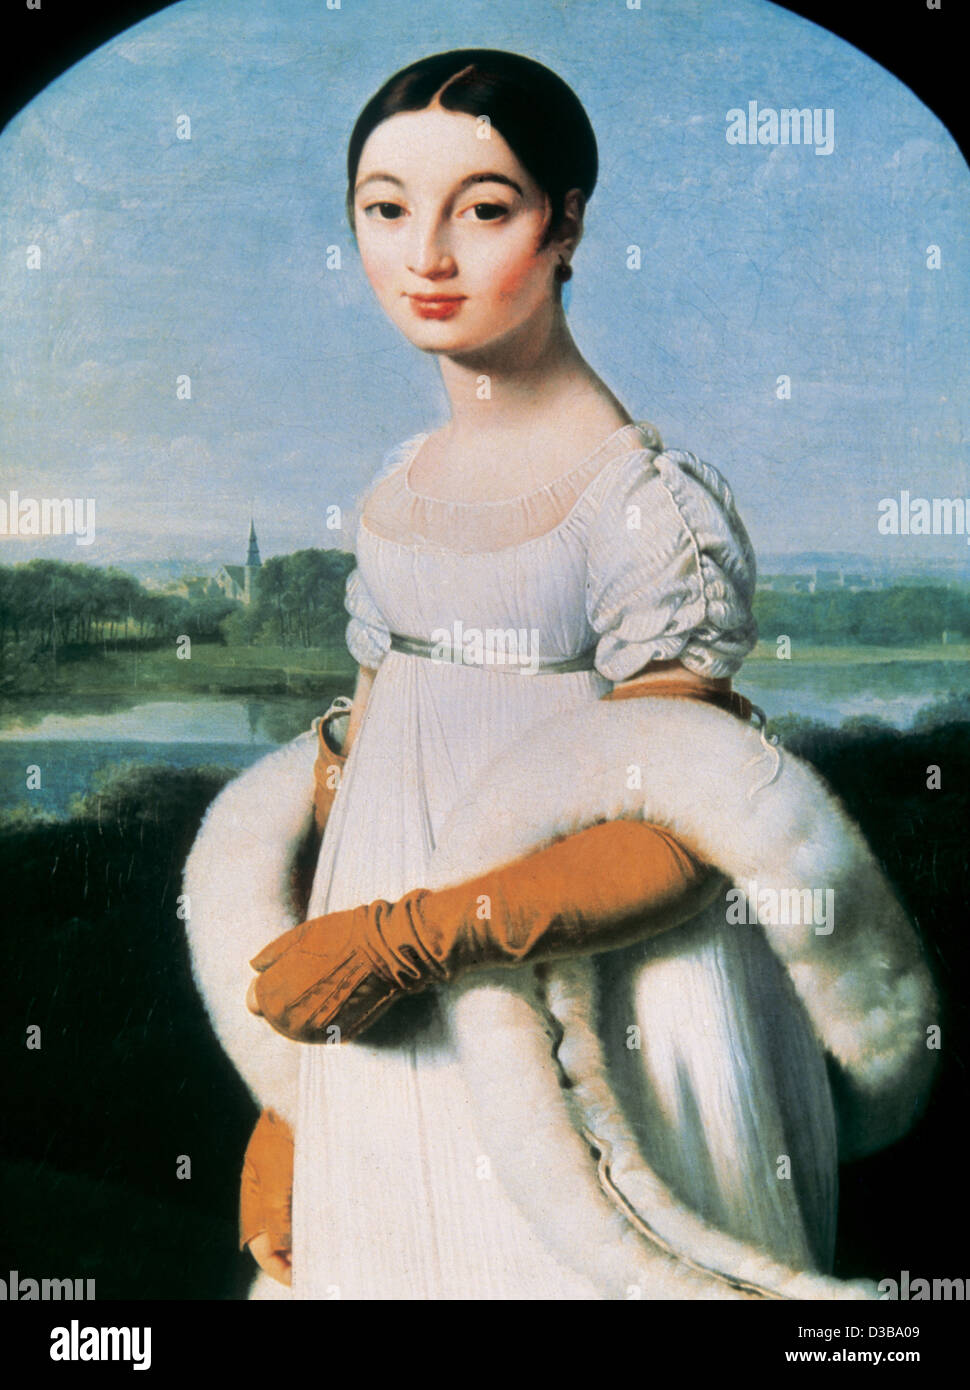 Jean Auguste Dominique Ingres (1780-1867). French painter. Portrait of Madame Riviere, 1805. Musee d'Orsay, Paris. France. Stock Photo